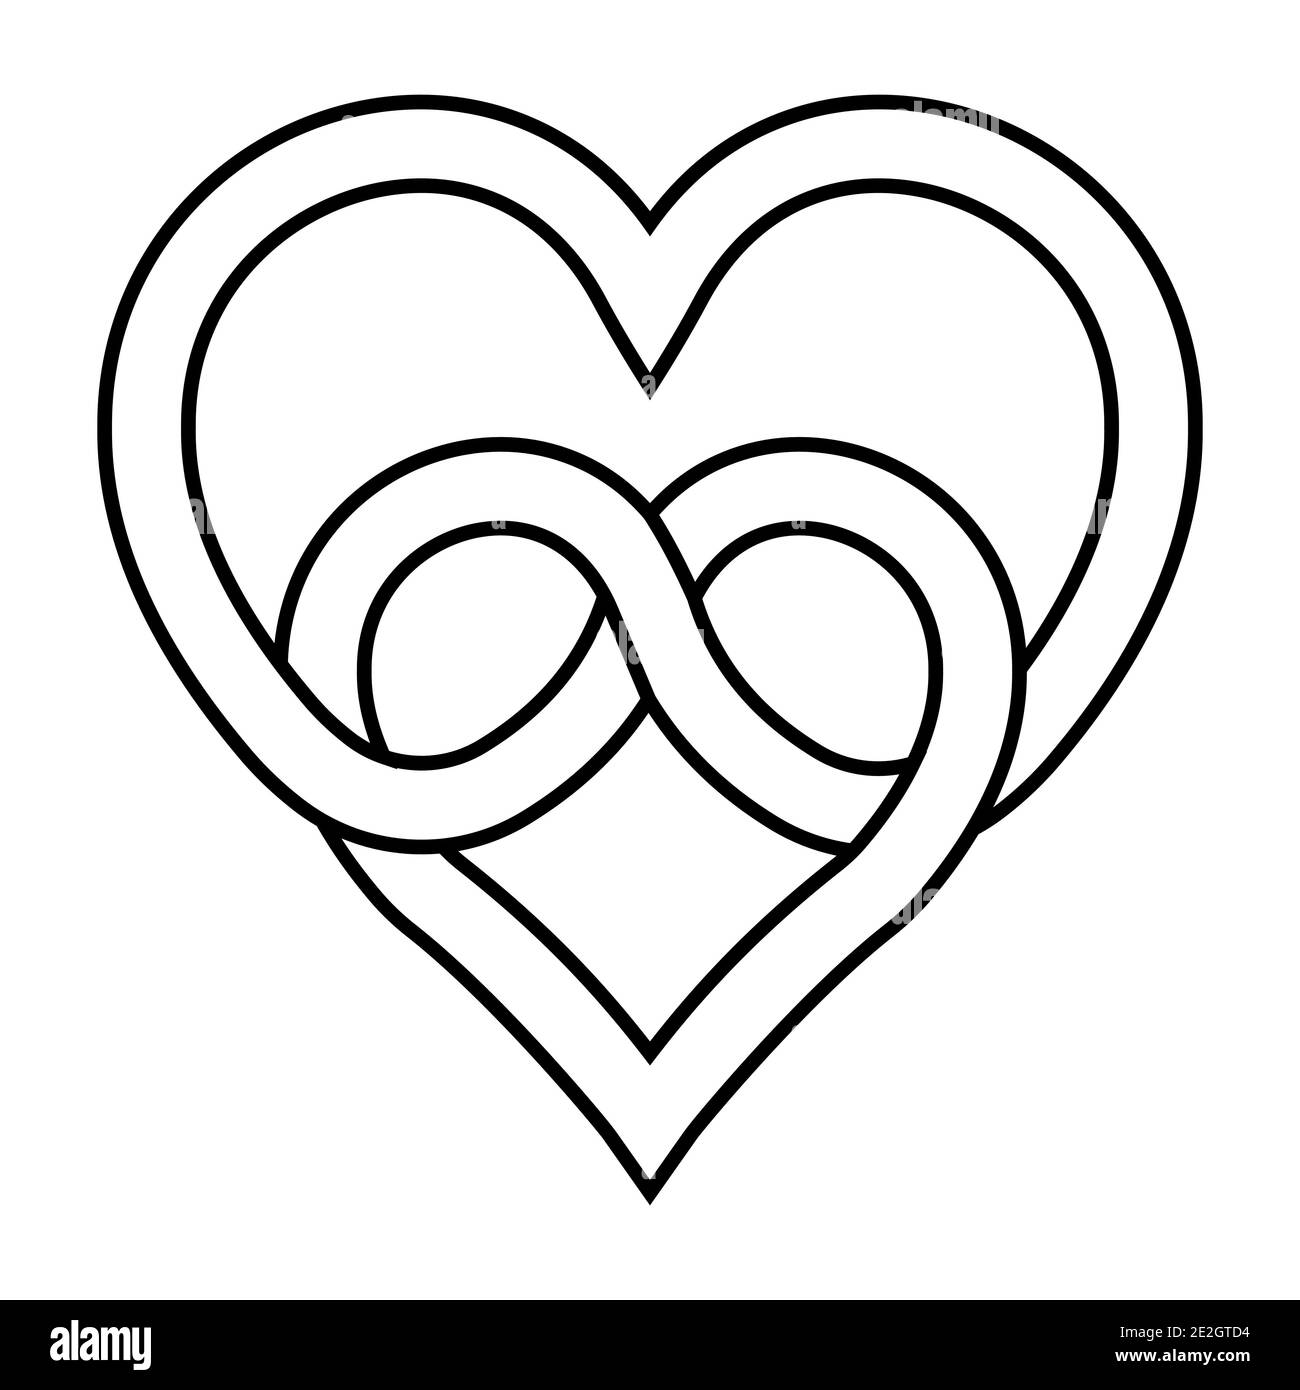 knot two hearts symbol of eternal love, vector sign of infinite love knot of intertwined hearts Stock Vector